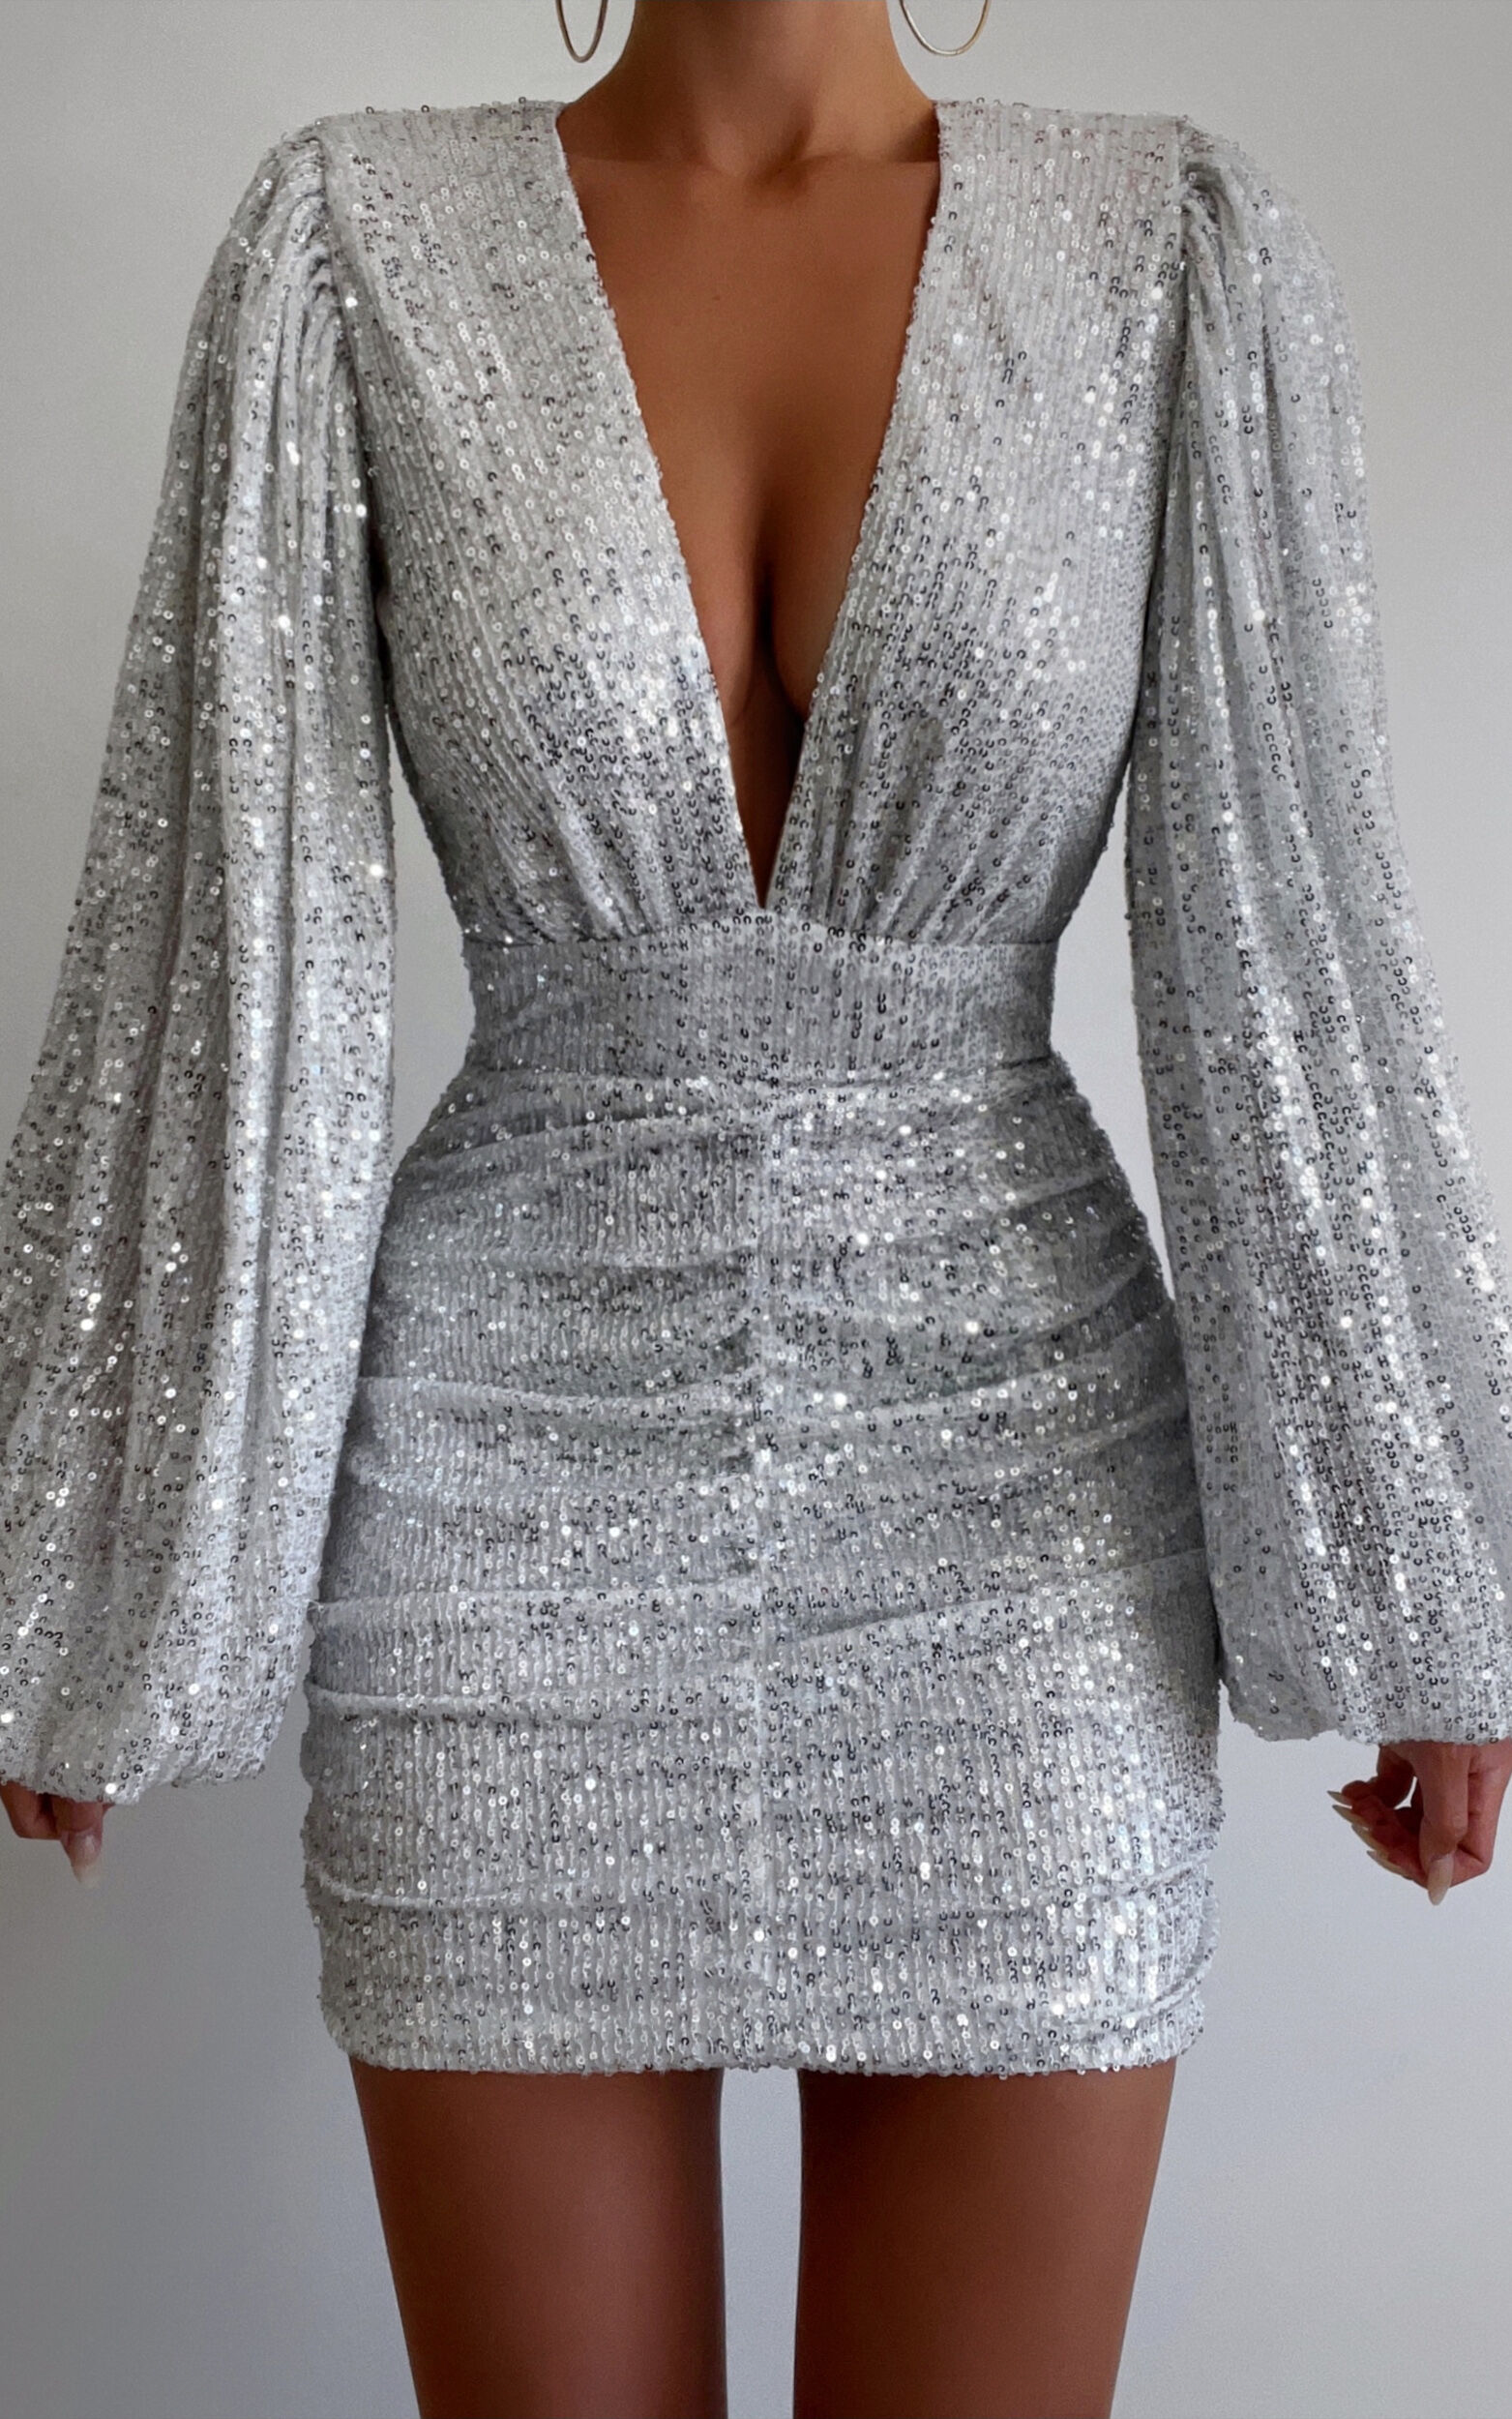 Rhylee Mini Dress - Long Sleeve Ruched Dress in Silver Sequin - 04, SLV1